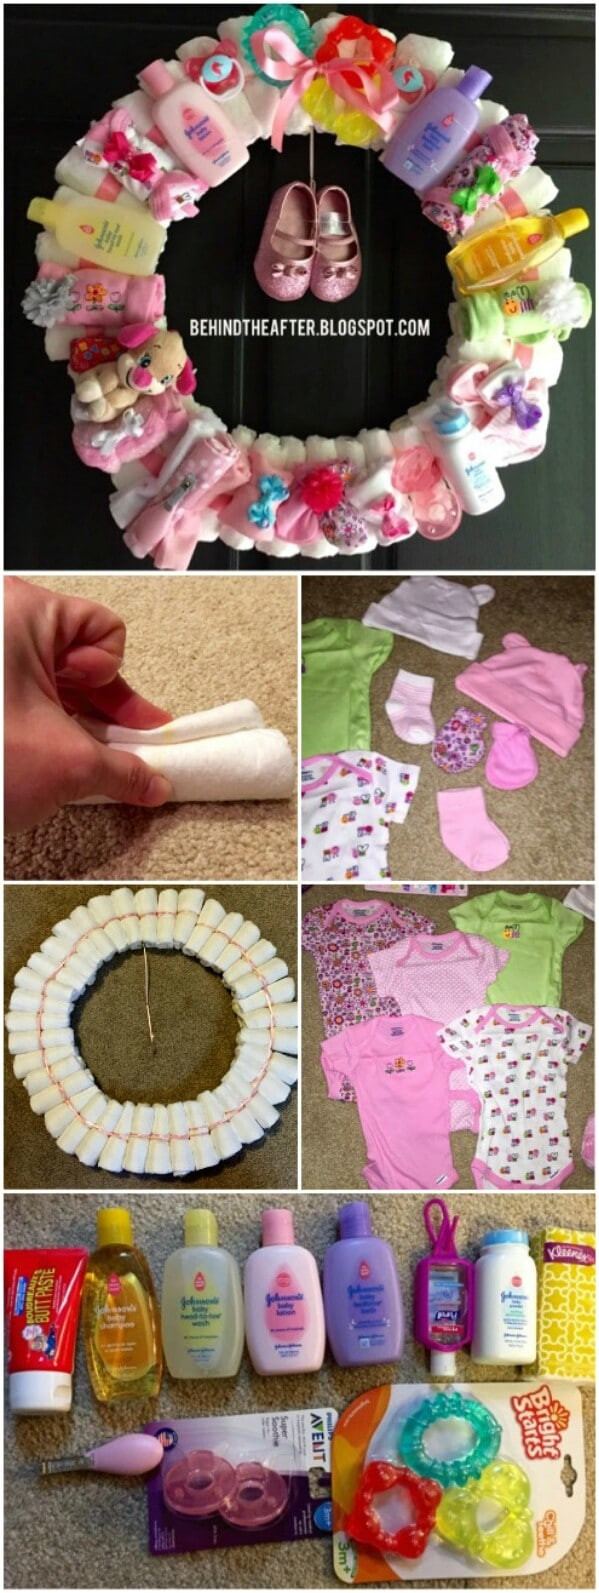 DIY Baby Shower Gift
 25 Enchantingly Adorable Baby Shower Gift Ideas That Will